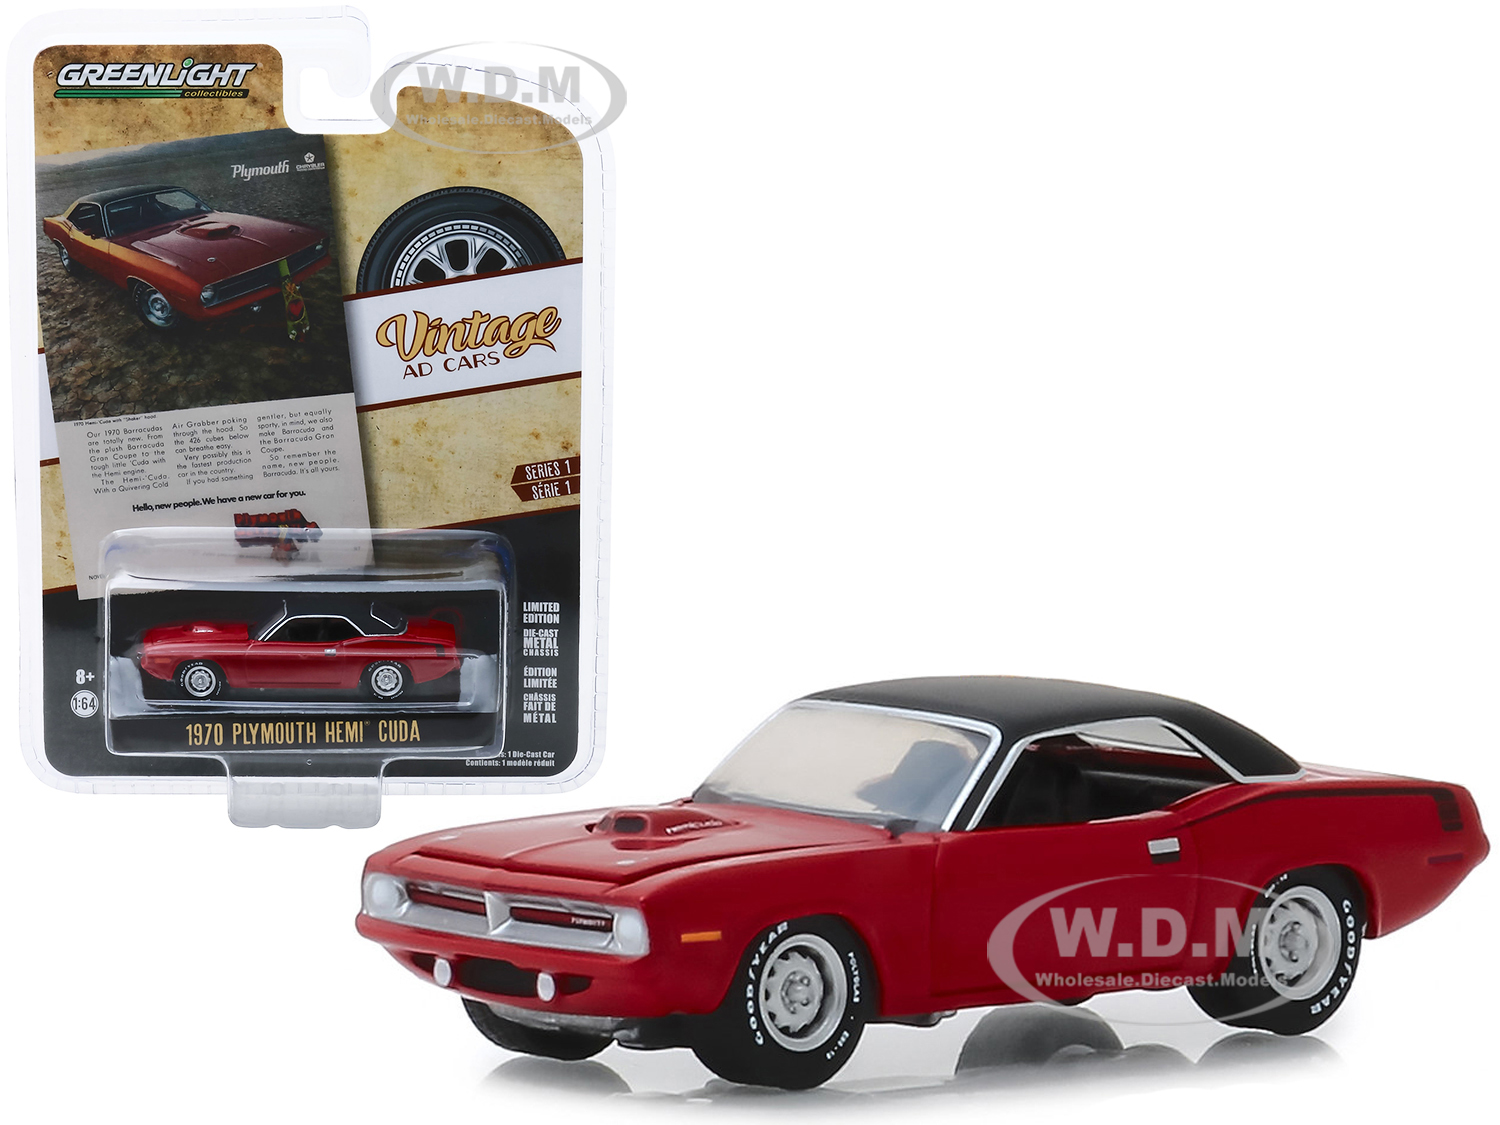 1970 Plymouth Hemi Barracuda Red With Black Top "hello New People. We Have A New Car For You" "vintage Ad Cars" Series 1 1/64 Diecast Model Car By Gr